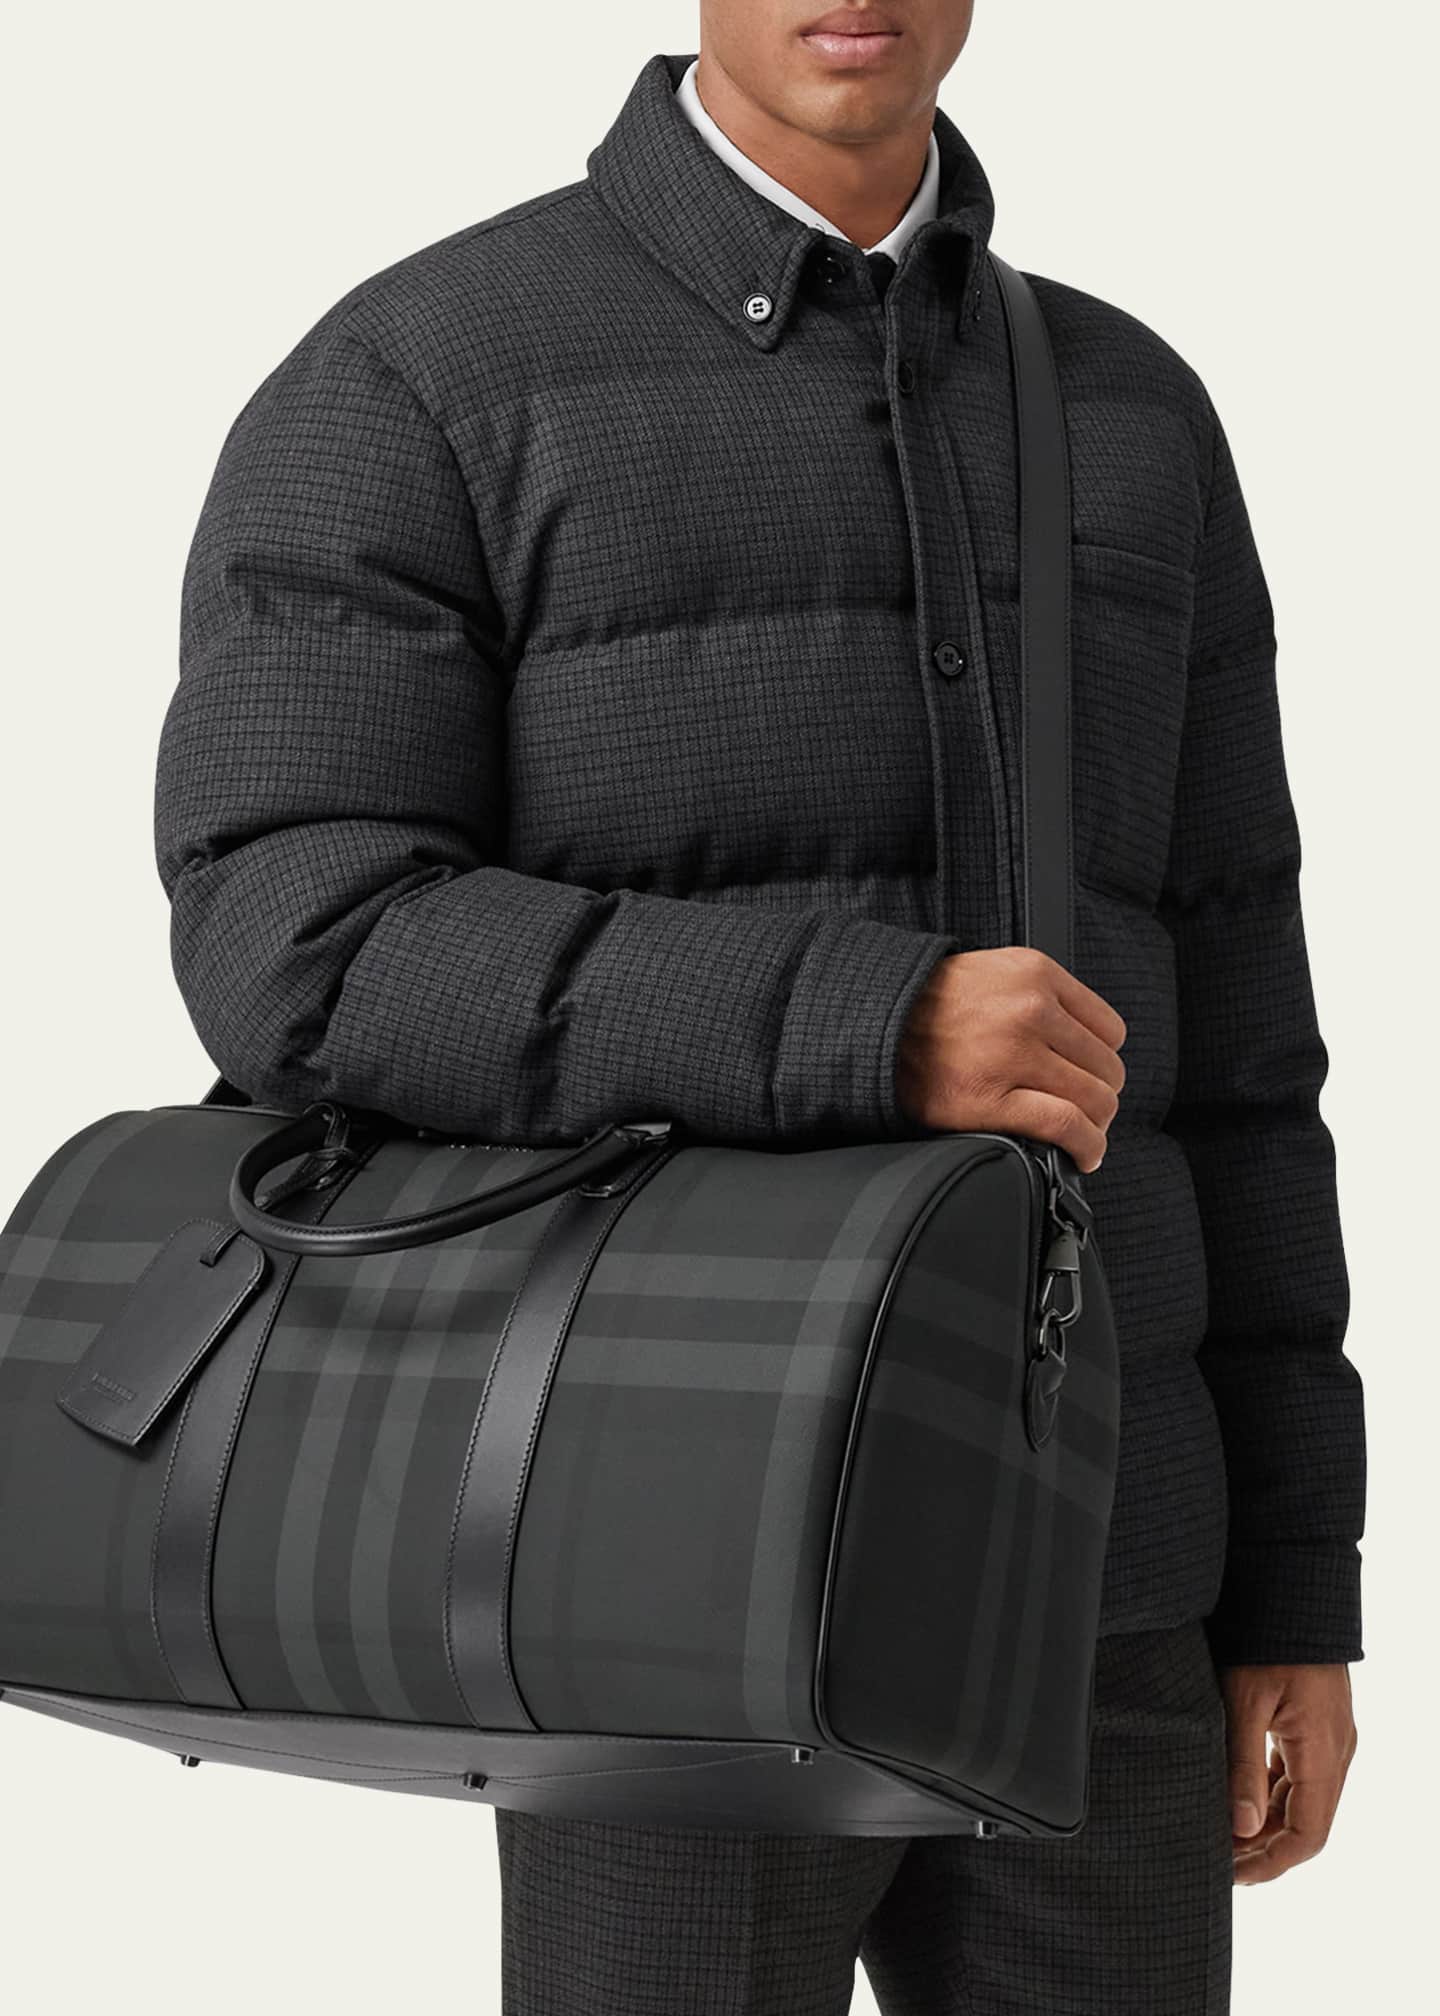 I navnet Stereotype At adskille Burberry Men's Charcoal Check Holdall Duffel Bag - Bergdorf Goodman